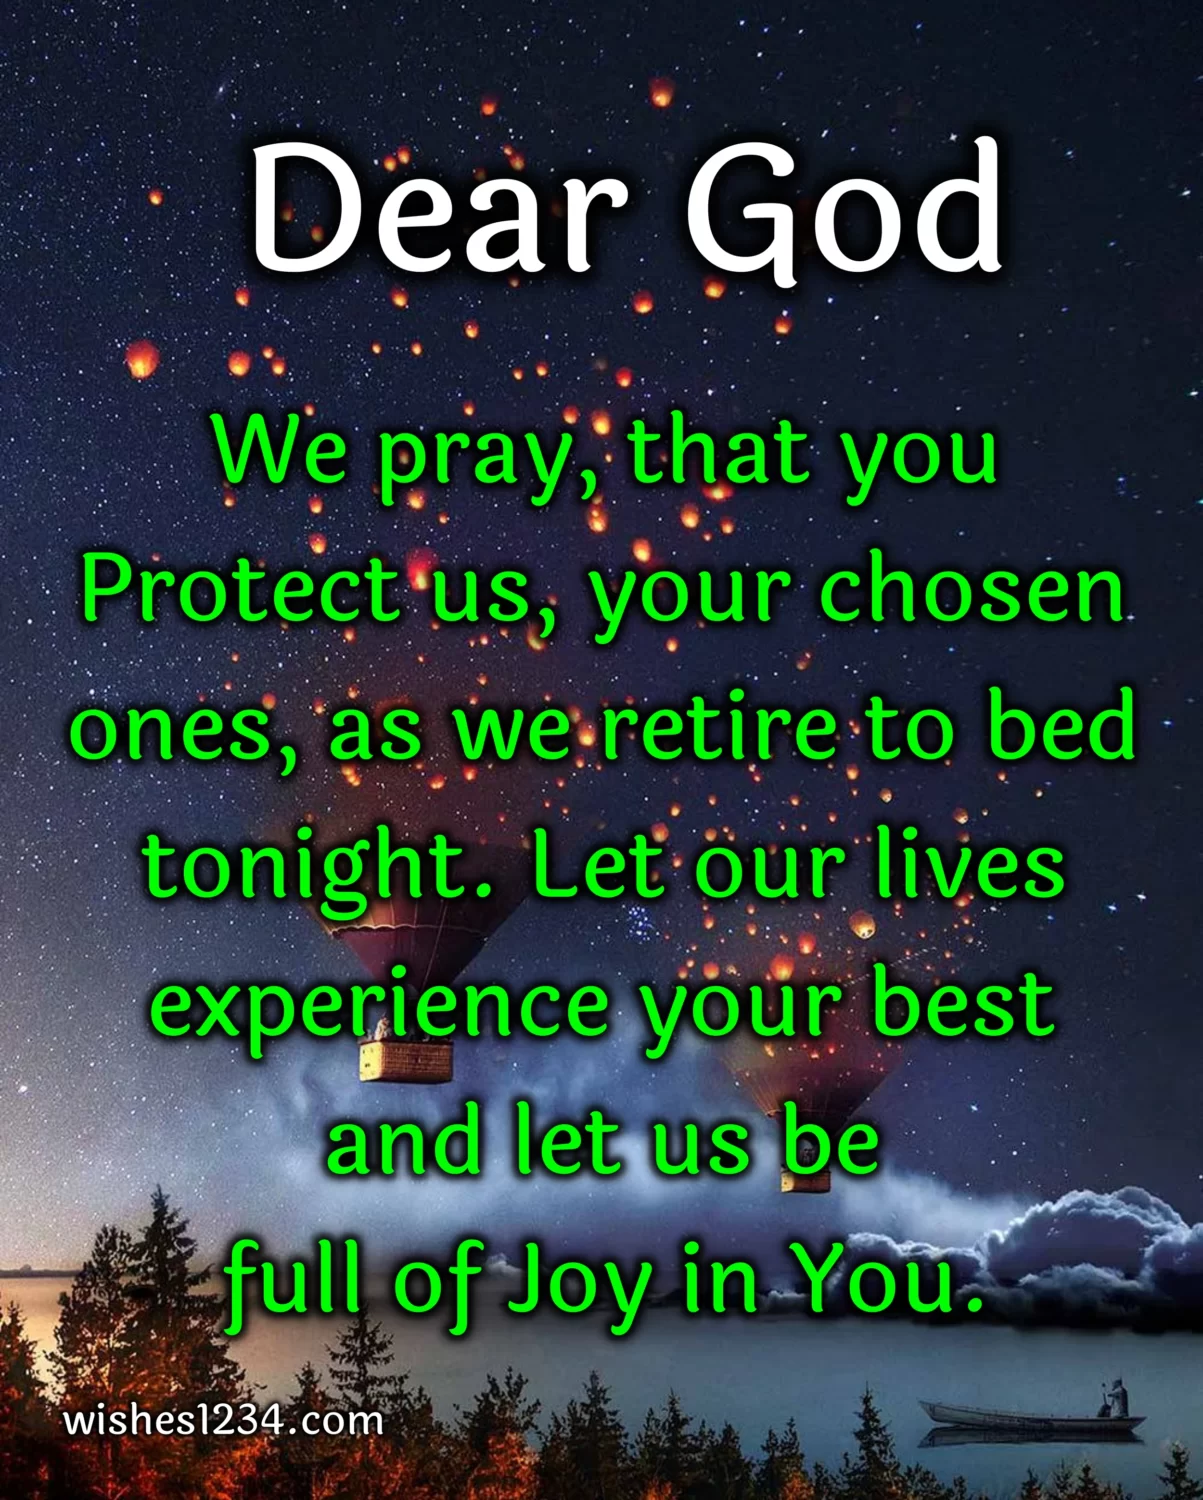 Good night prayer with hot air balloons in background, Good Night with Quotes.